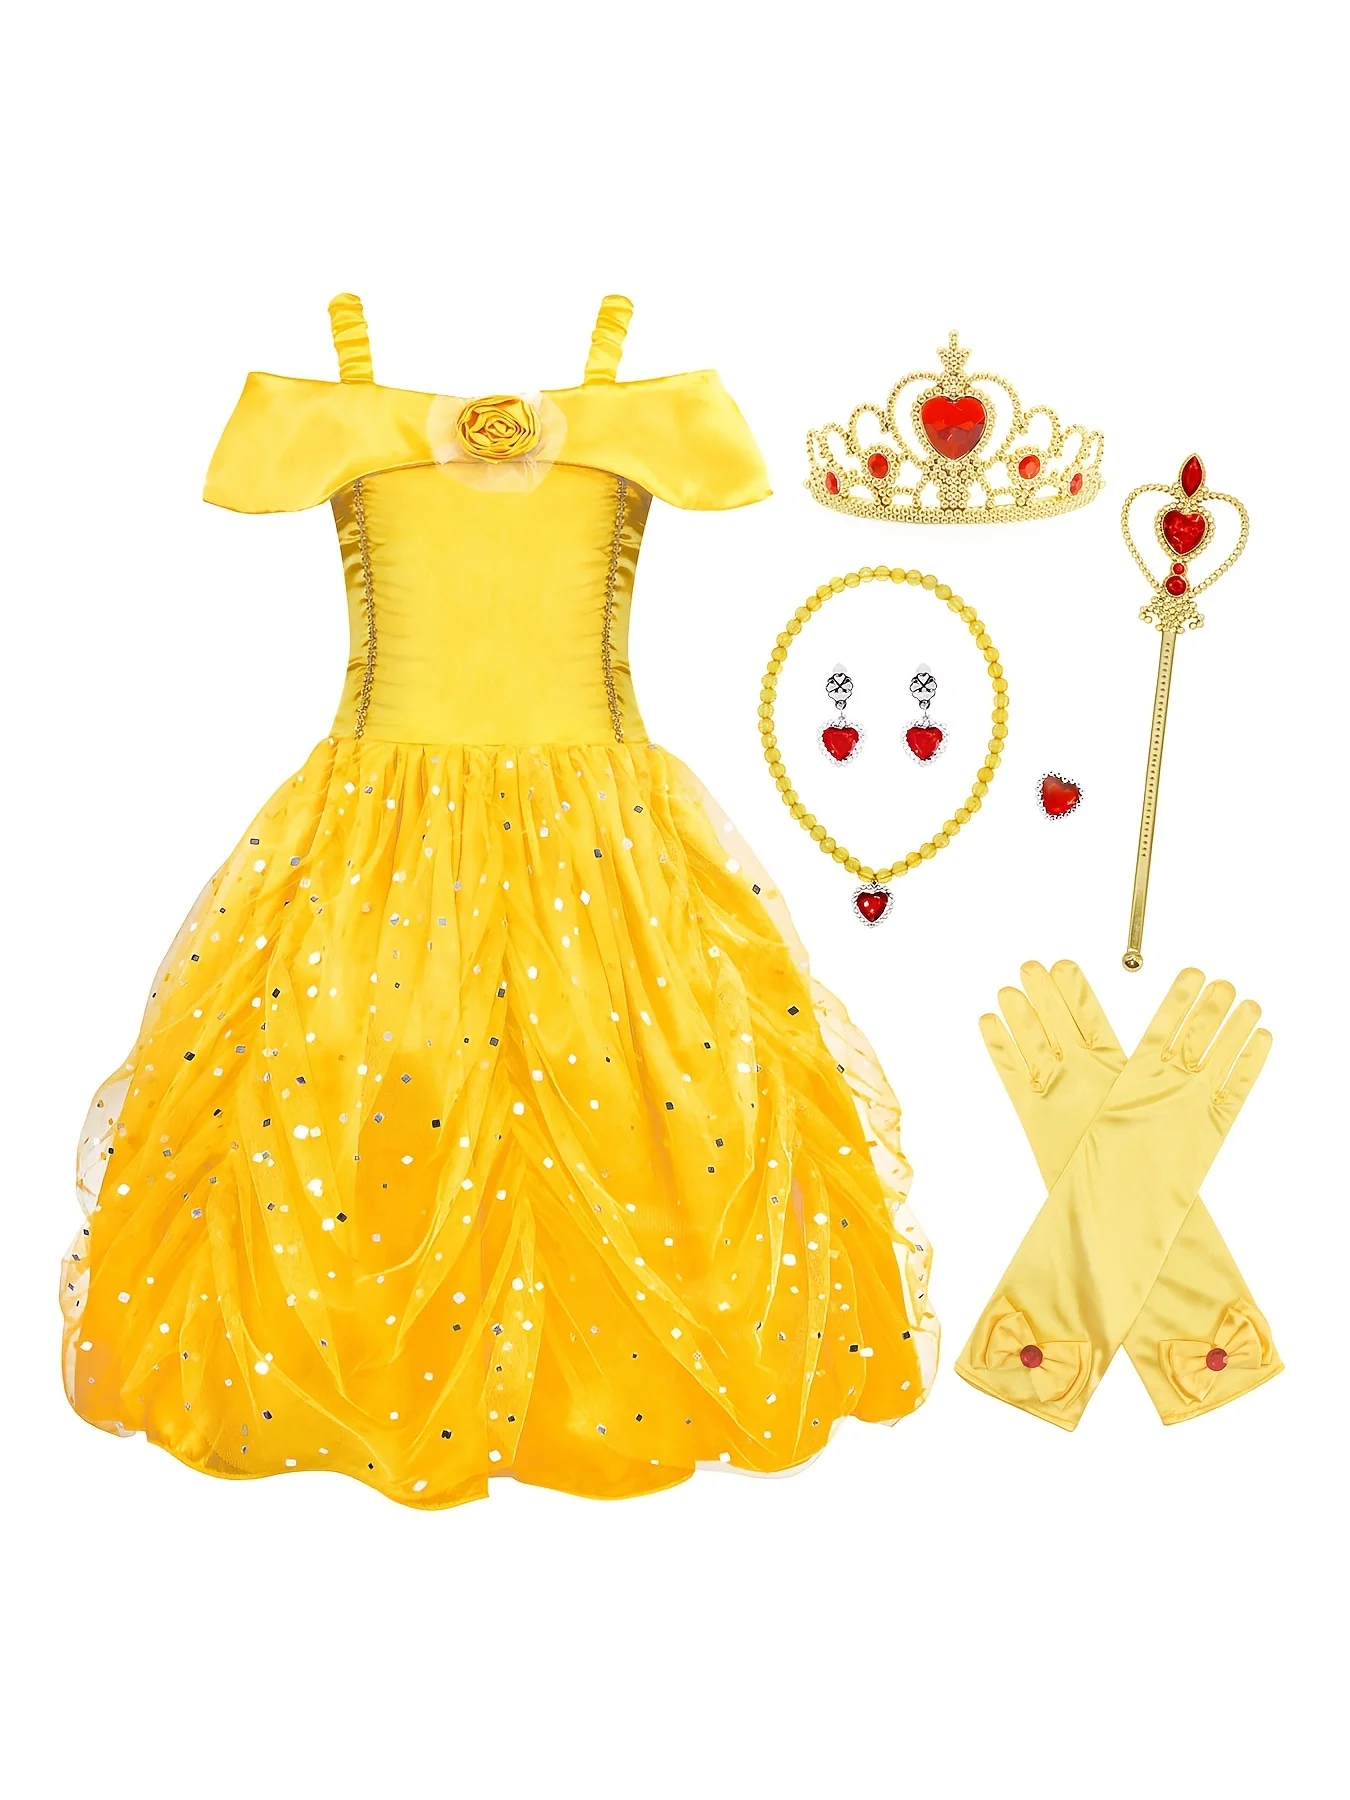 Girls Shoulder Layered Dress Princess Dress Costume Dress Up Birthday Party Christmas Cosplay Outfit Accessories Included Set